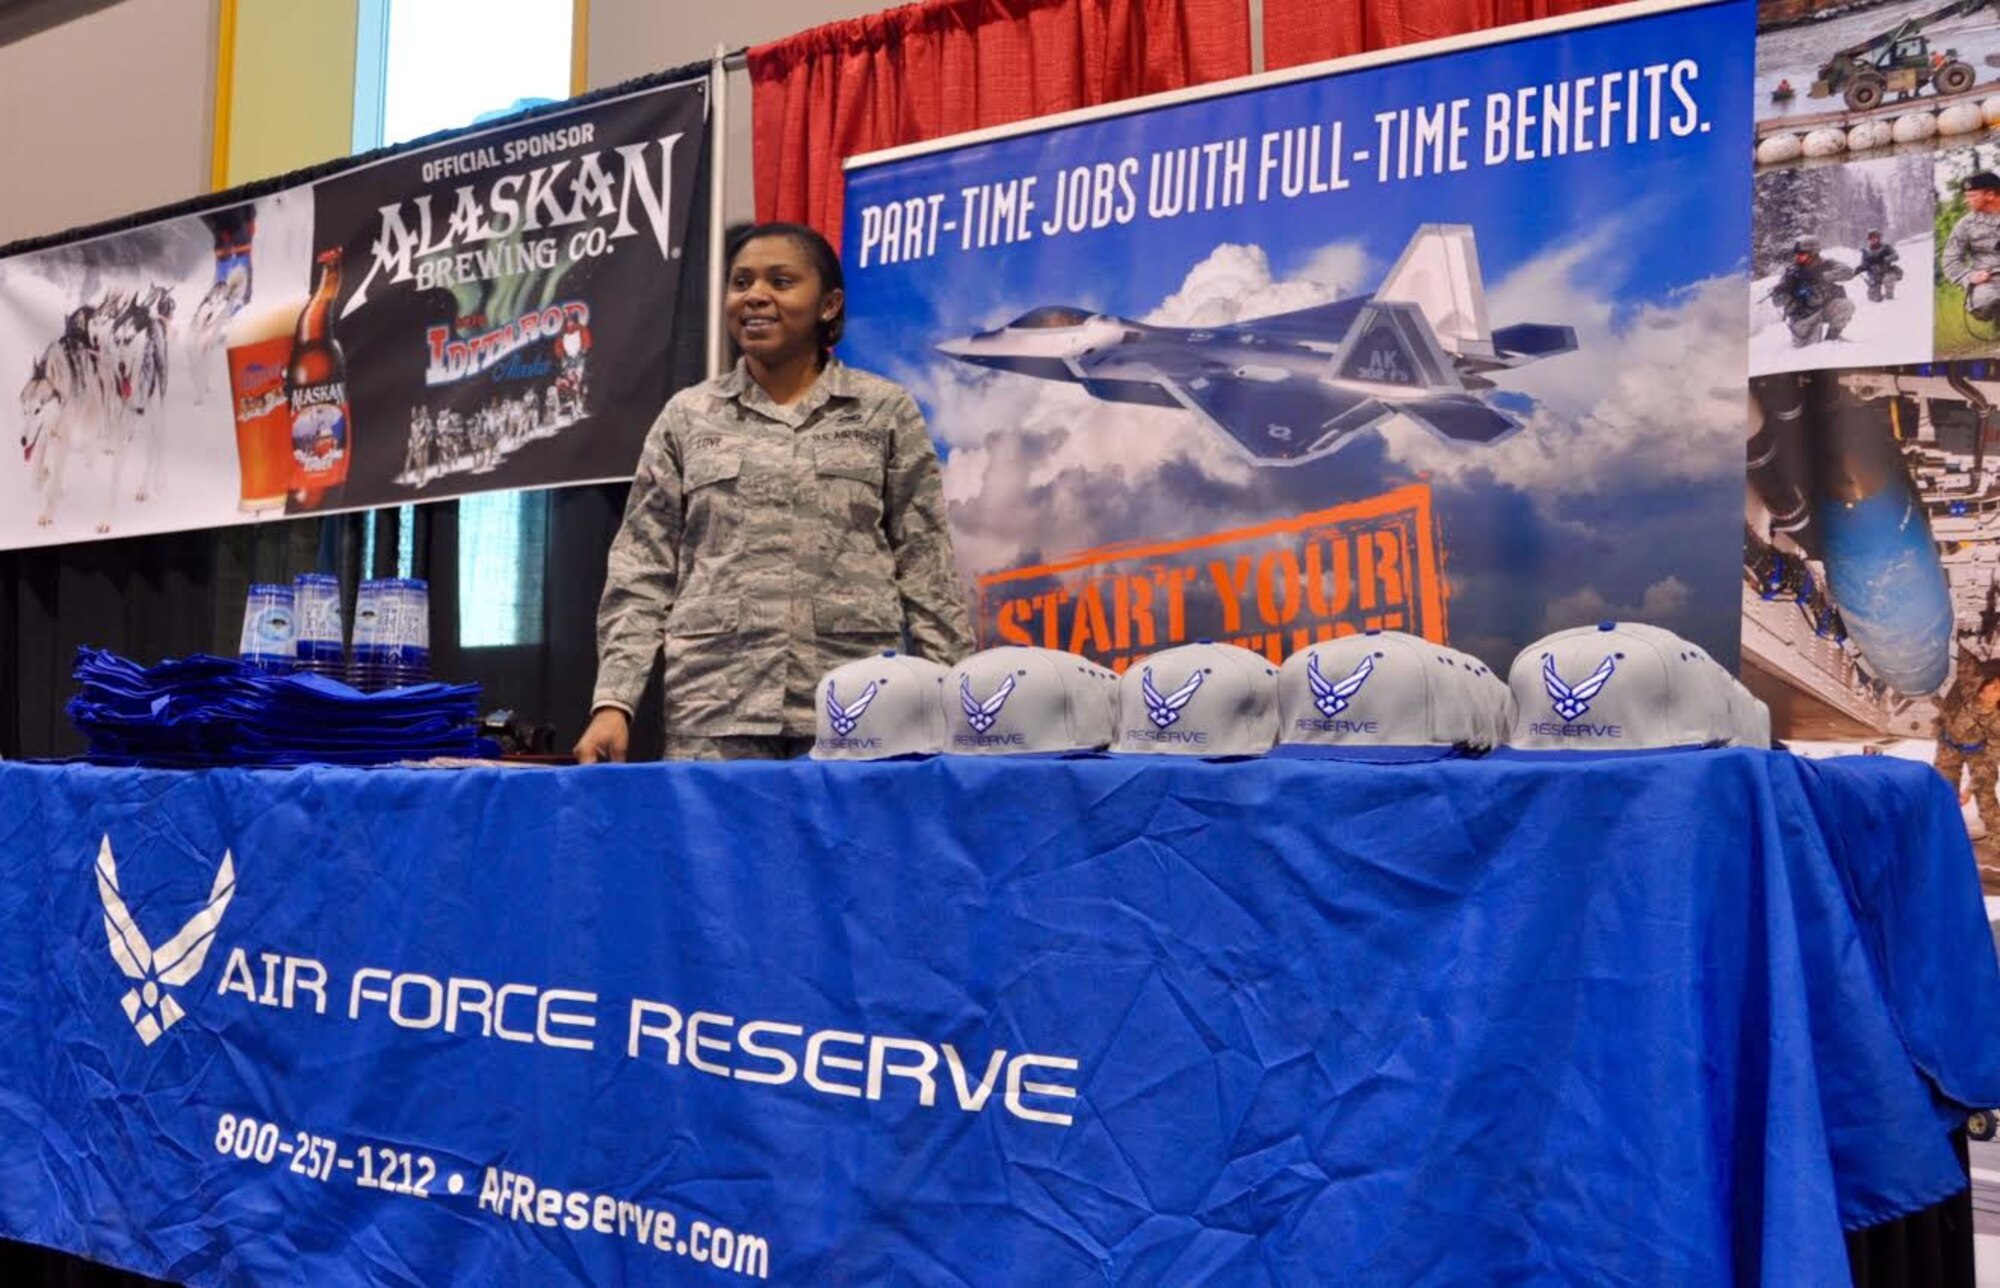 Tech. Sgt. Equallia Love, Air Force Reserve Recruiter, stands ready to discuss recruiting opportunities during social hour at the Mushers’ Banquet in Anchorage, Alaska, March 3, 2016. During the banquet, mushers pull their start numbers for the Iditarod. The Iditarod is a 1,000-mile sled dog race across the rugged terrain of Alaska. This is the second year Air Force Reserve Recruiting has sponsored the Iditarod, known as “The Last Great Race on Earth.”(U.S. Air Force/Tech. Sgt. Kimberly Moore) 